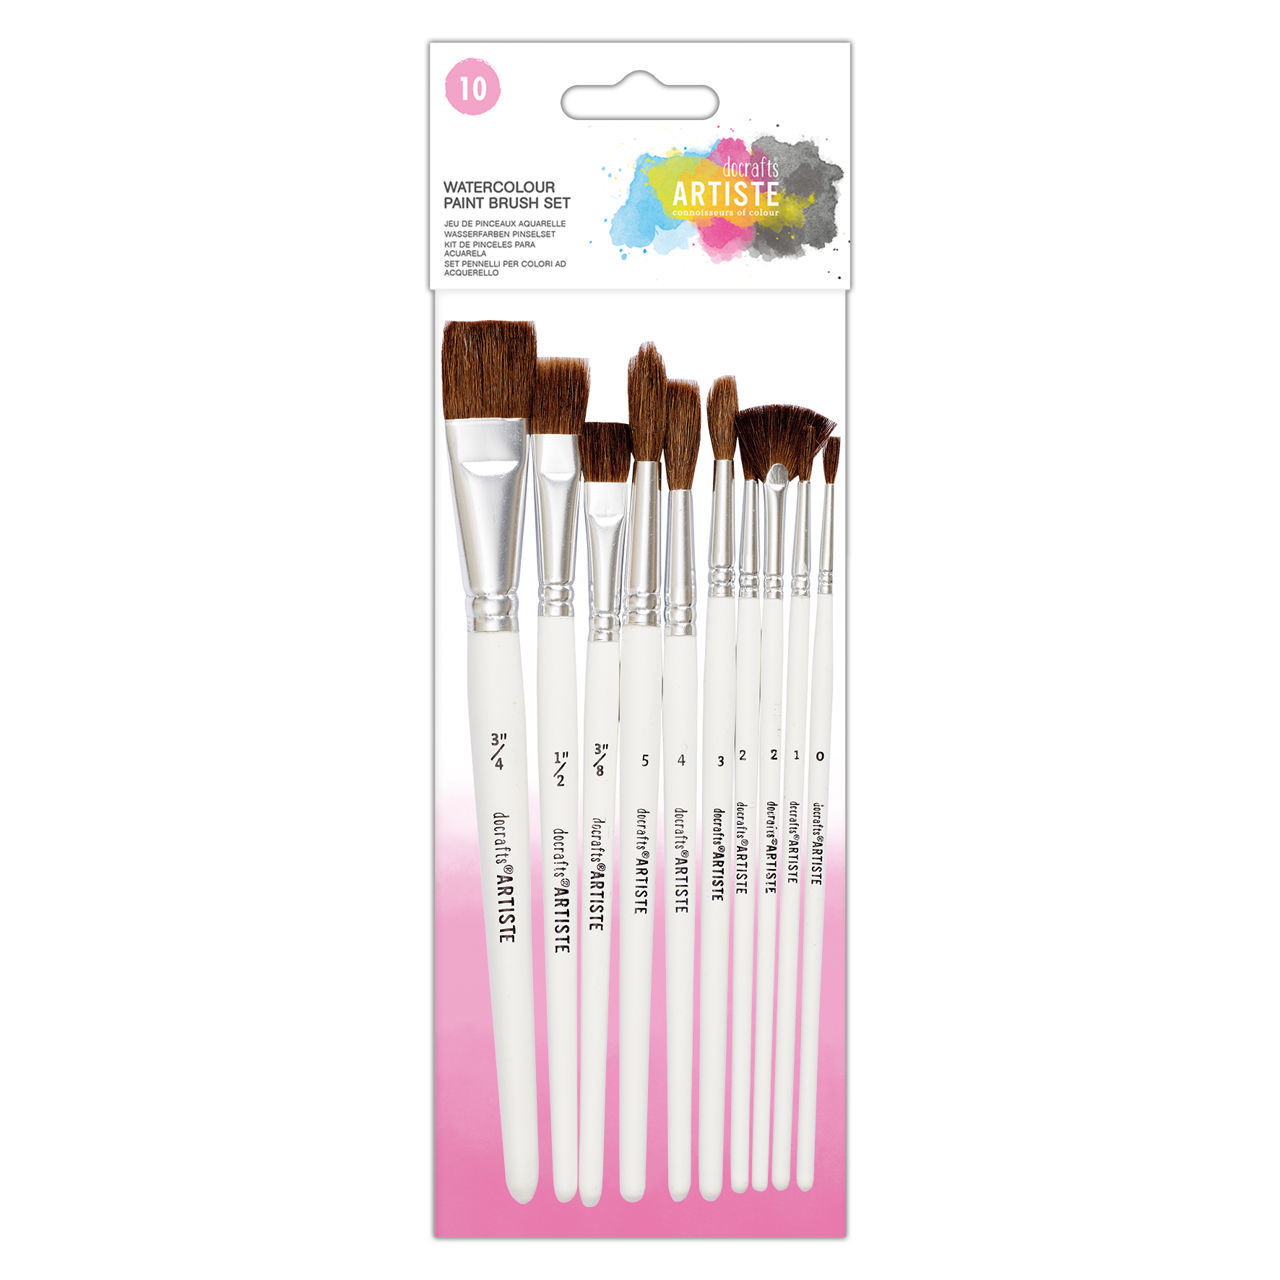 Watercolour Paint Brush Set - Pack of 10 Assorted